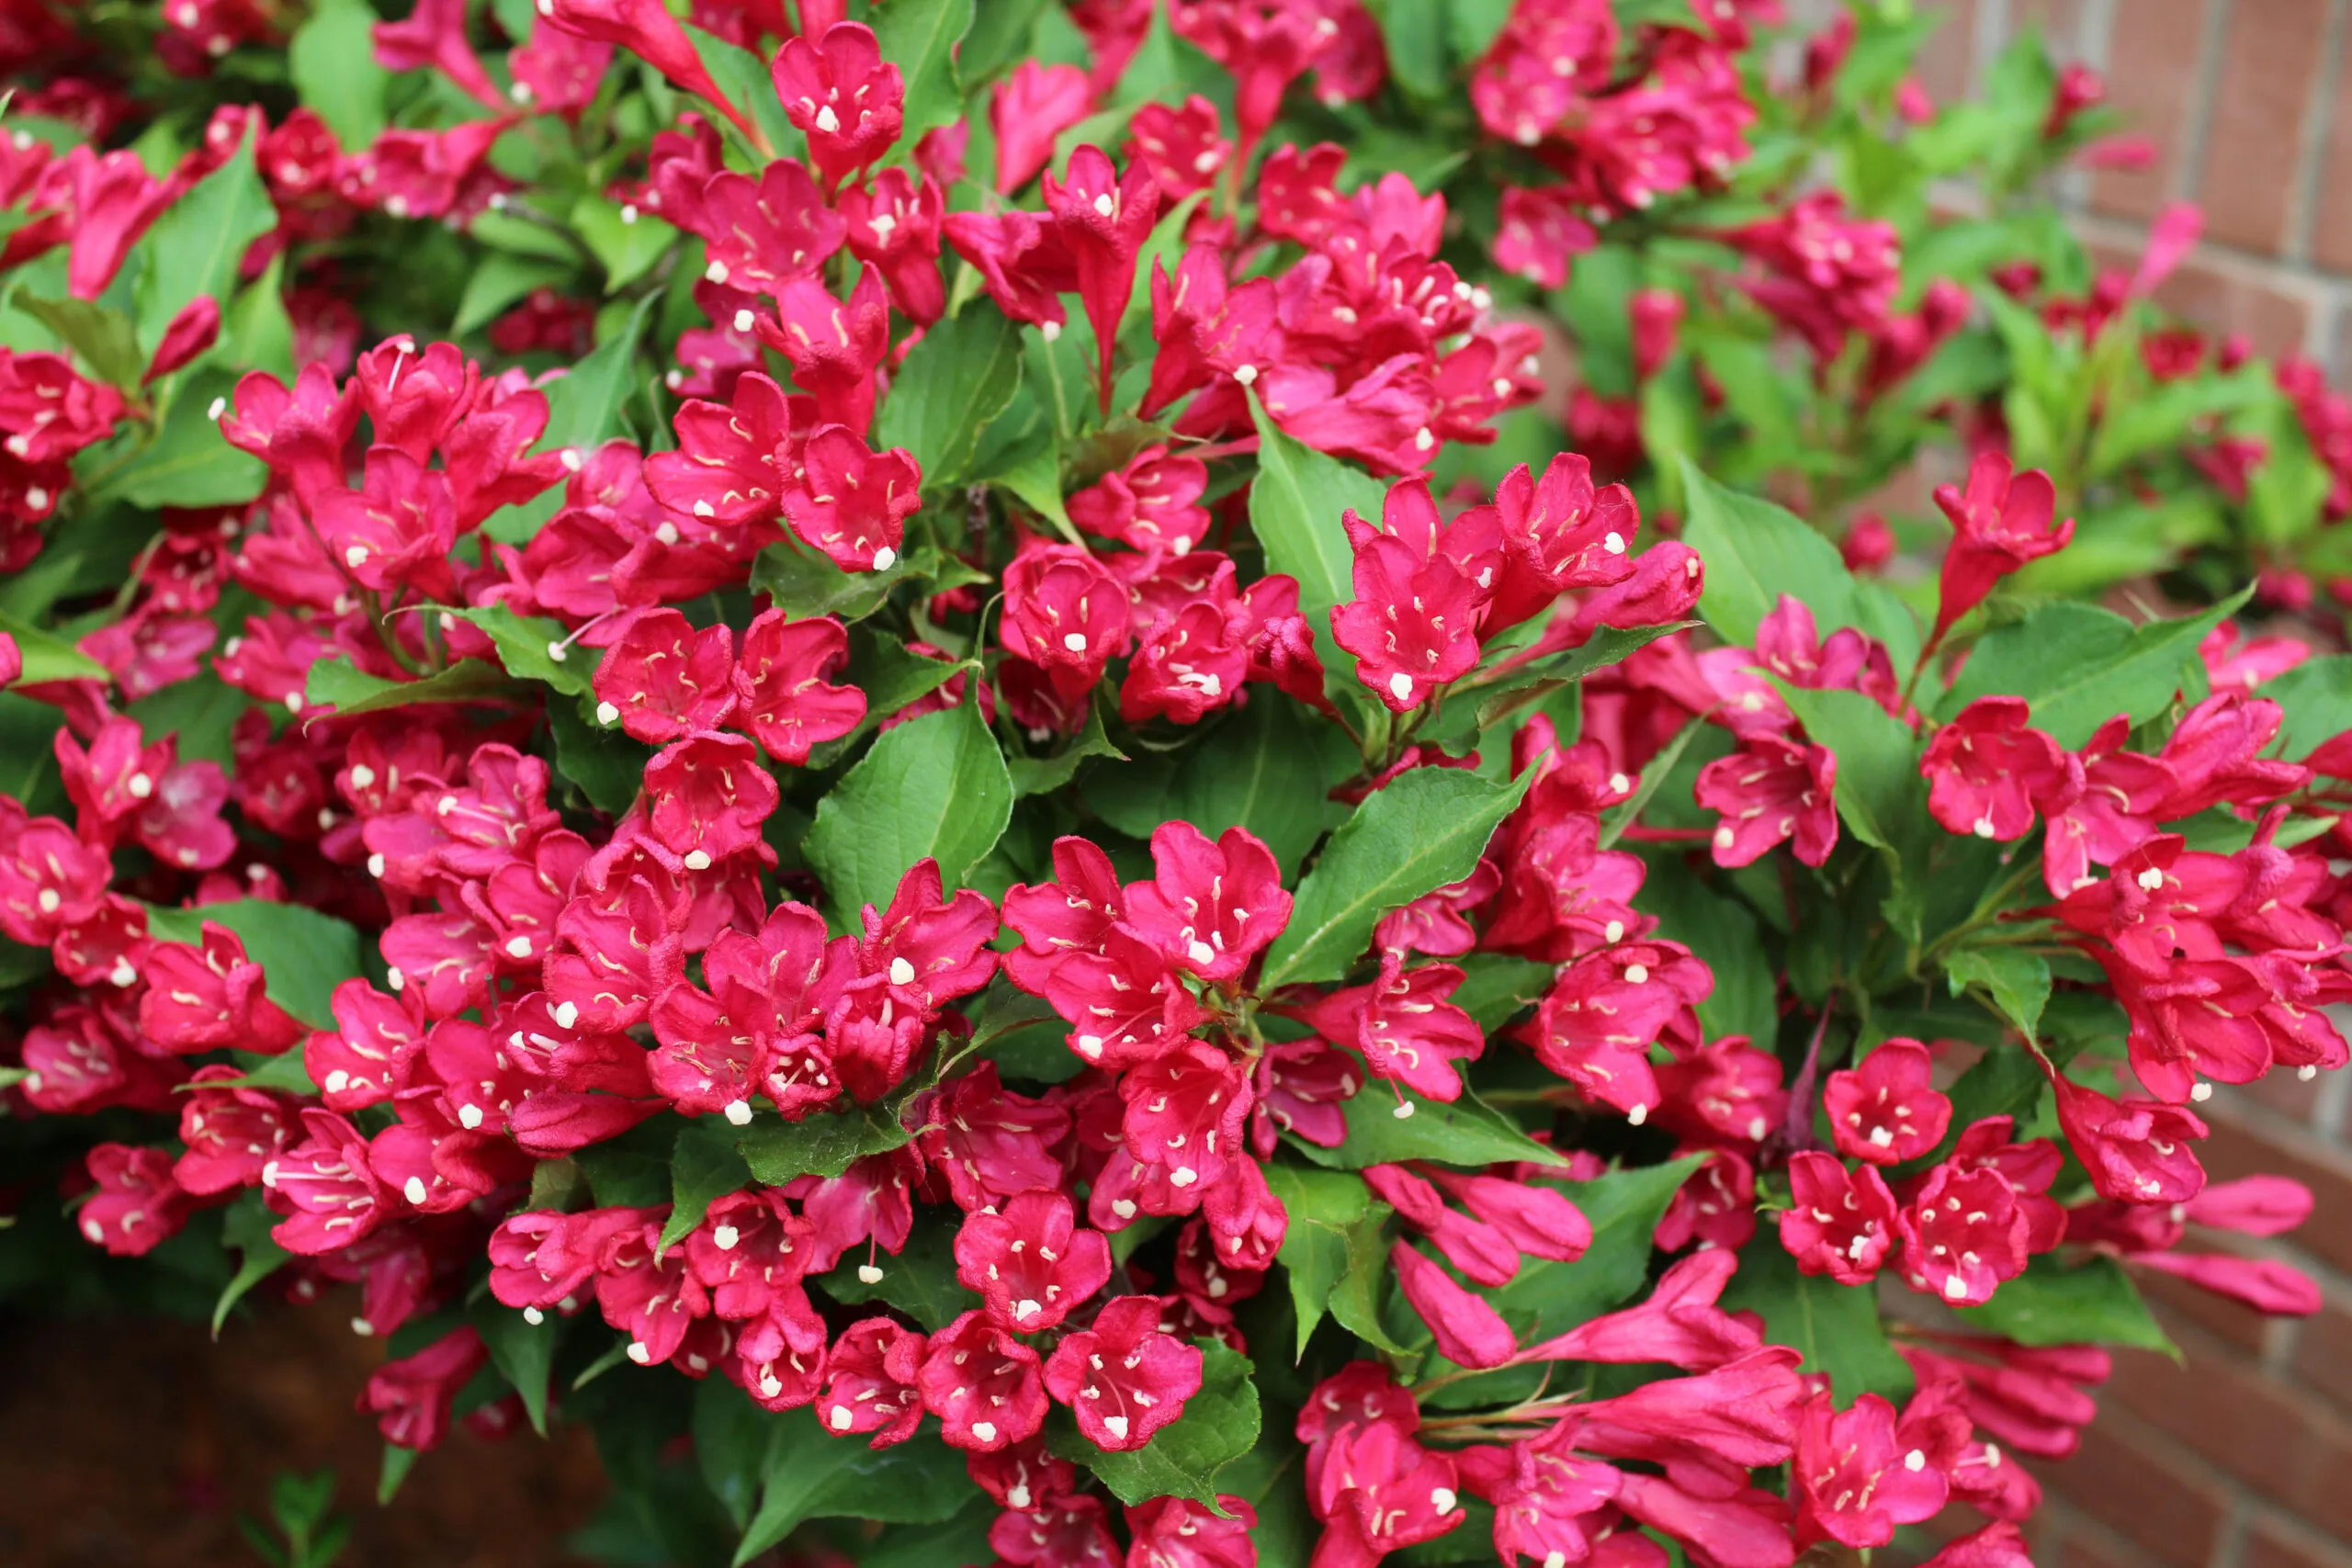 Weigela,Shrub,Blooms,With,Hot,Pink,Red,Prince,Flowers,In